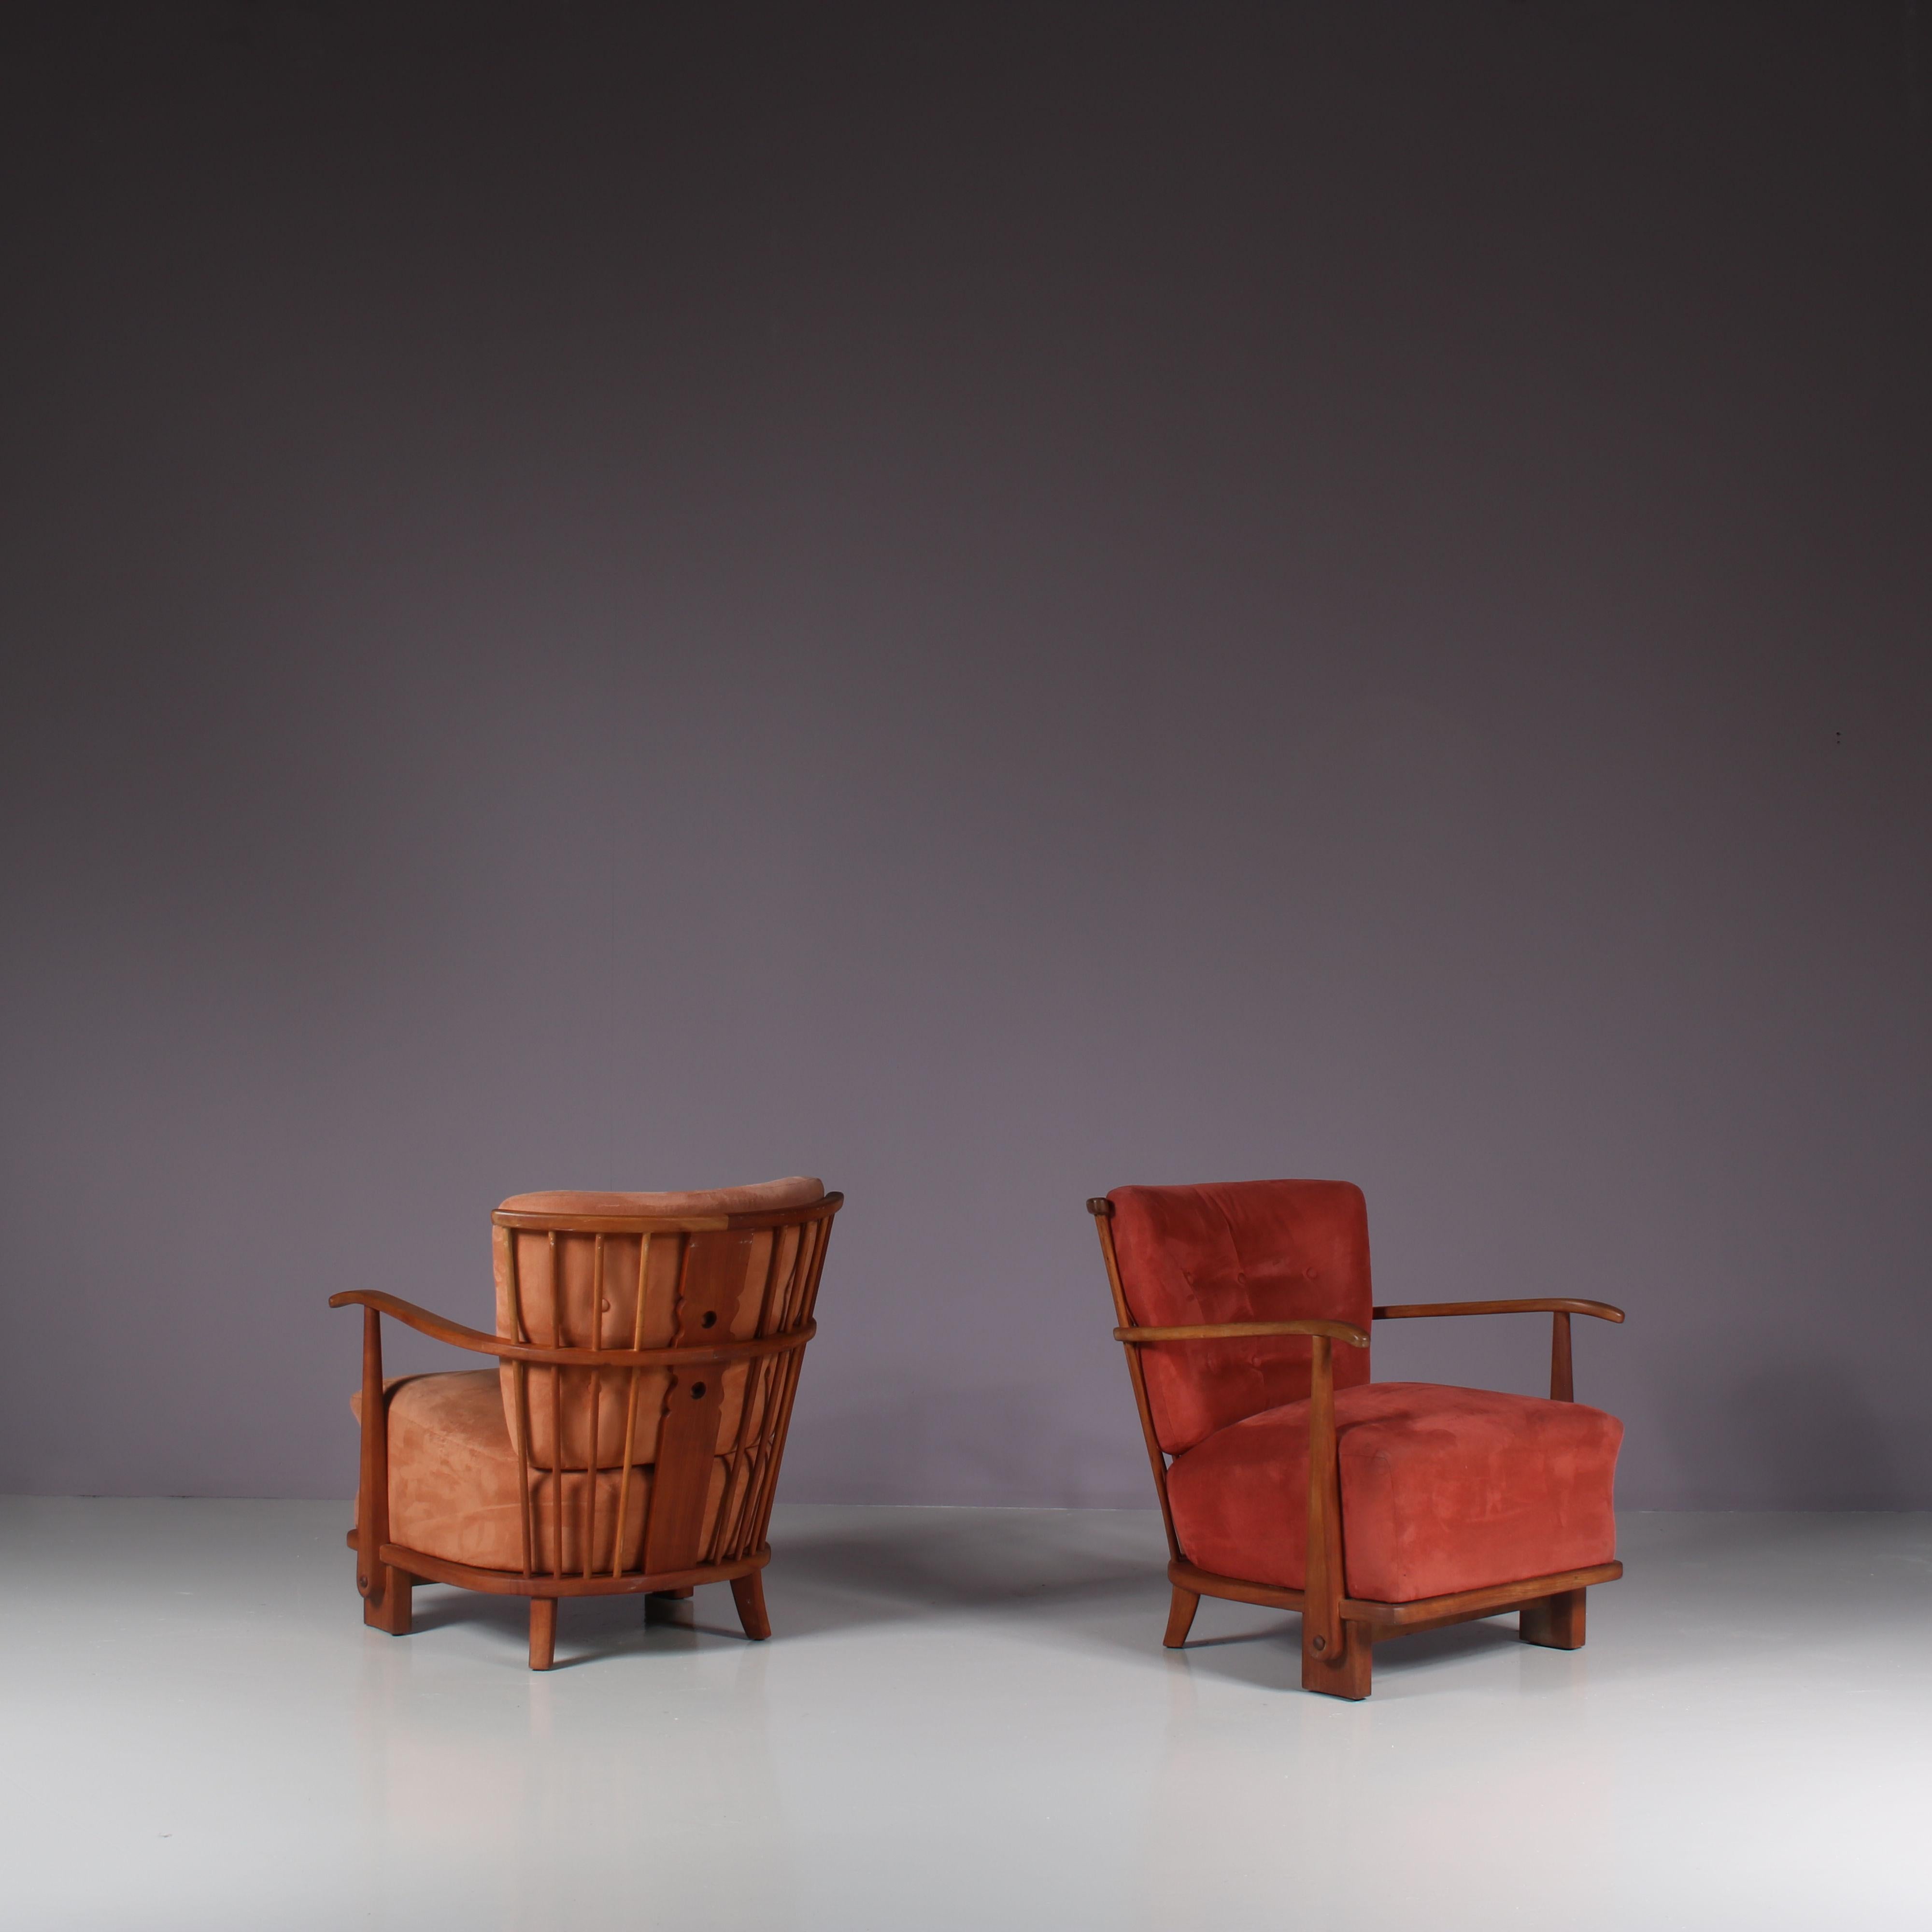 Mid-20th Century Pair of “1590” Easy Chairs by Fritz Hansen, Denmark 1940